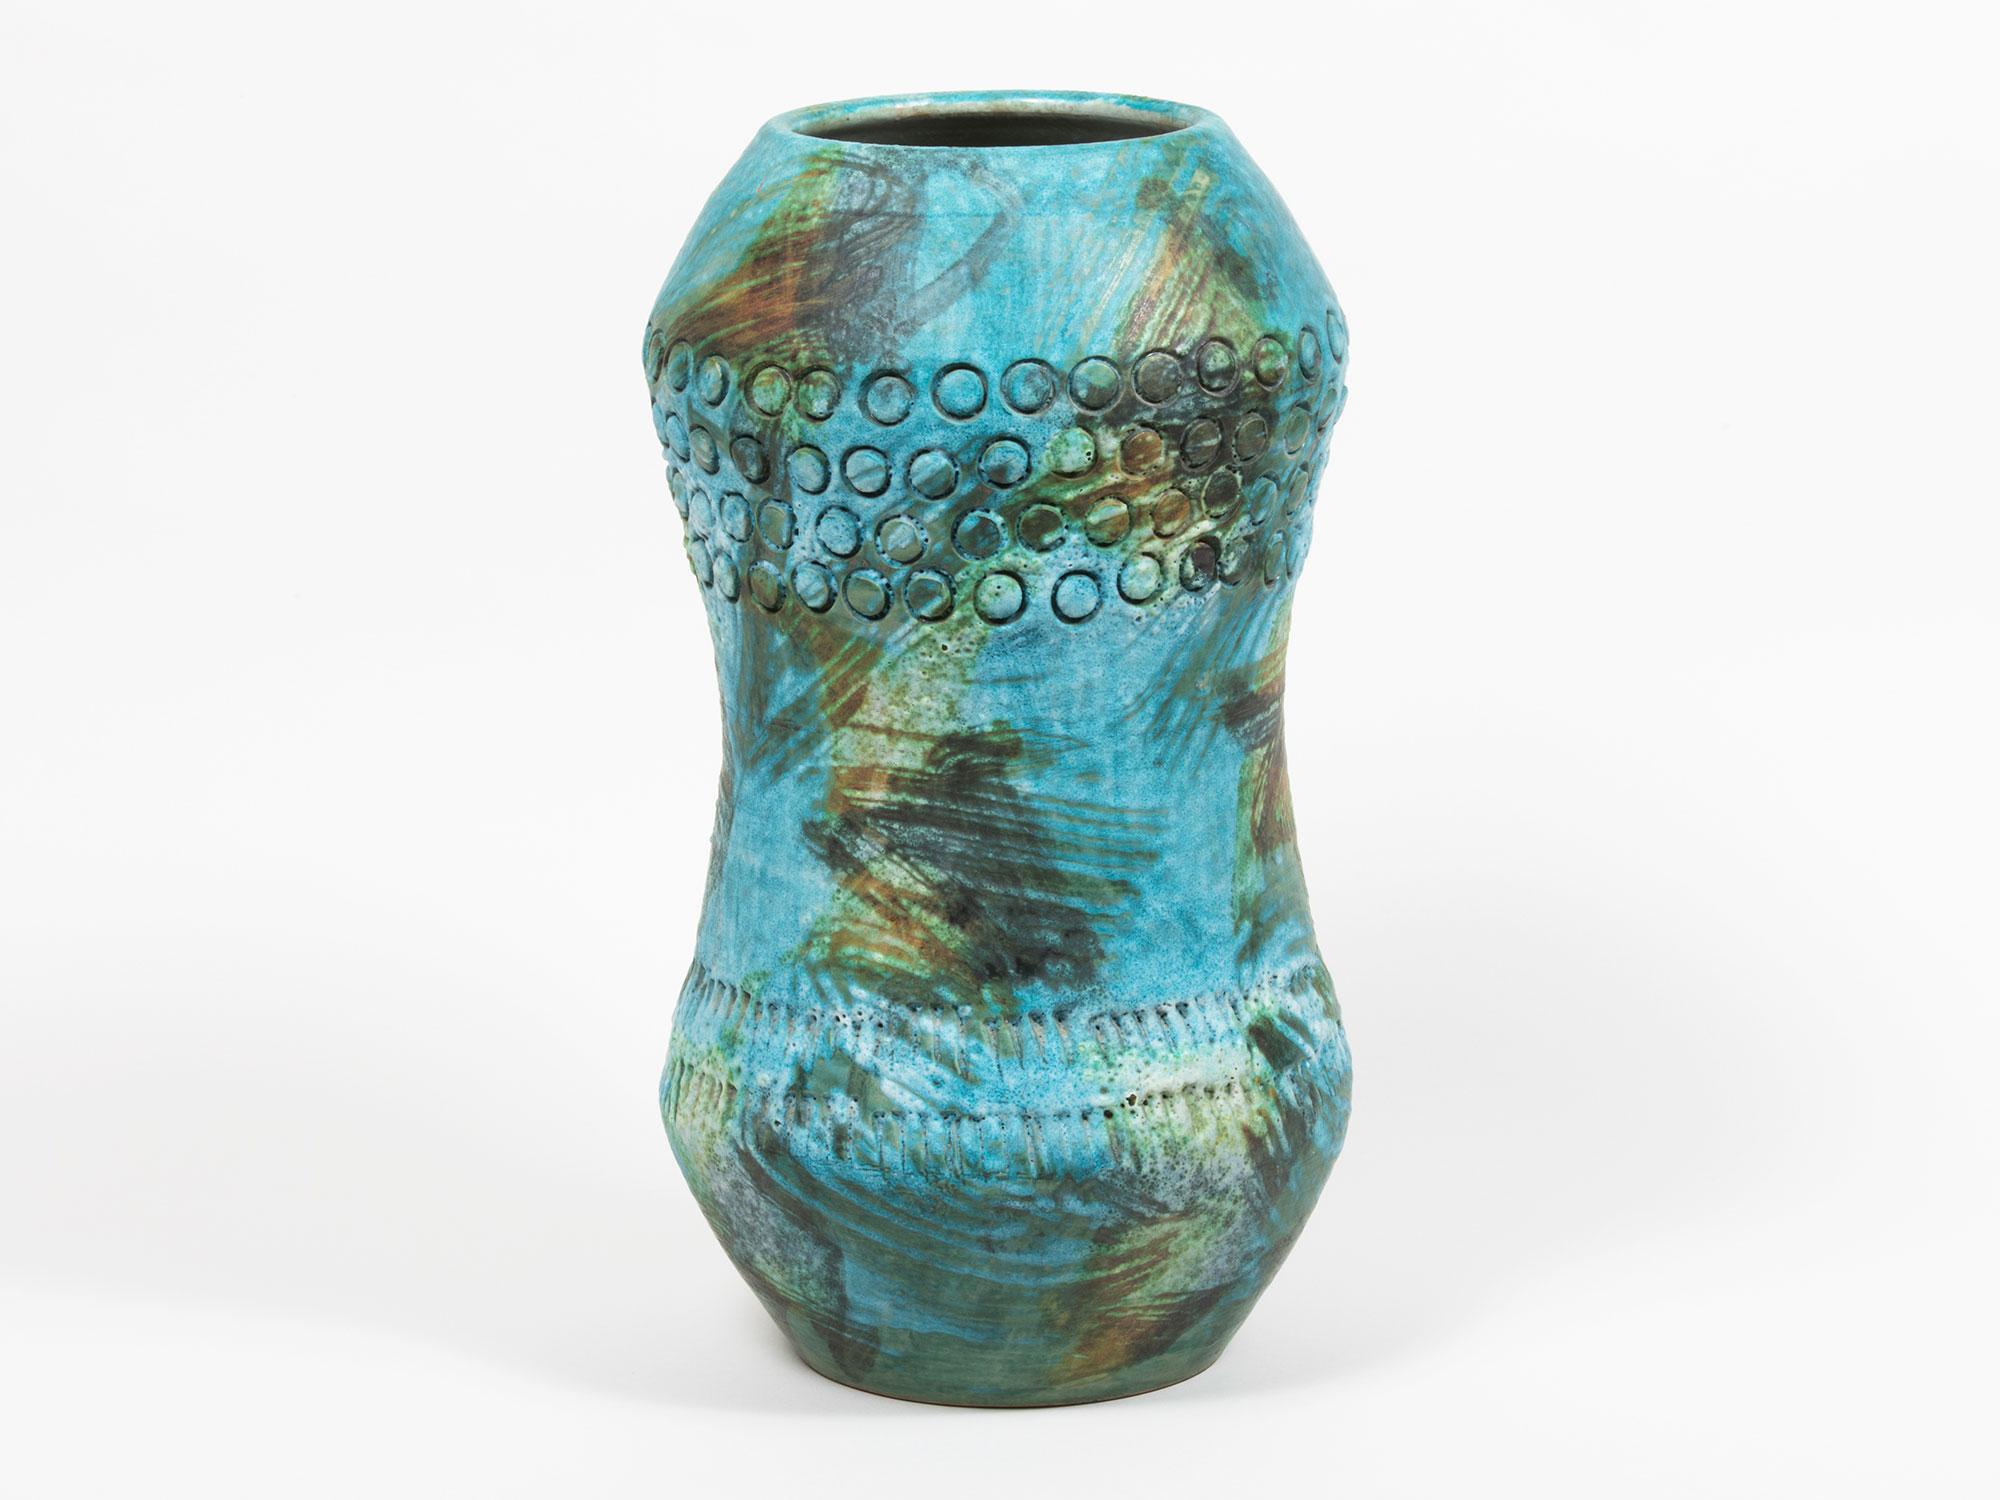 Massive turquoise hand-thrown glazed ceramic vessel, attributed to Aldo Londi for Bitossi. Features bands of stamped circle and line motifs around the top and bottom. Stamped 